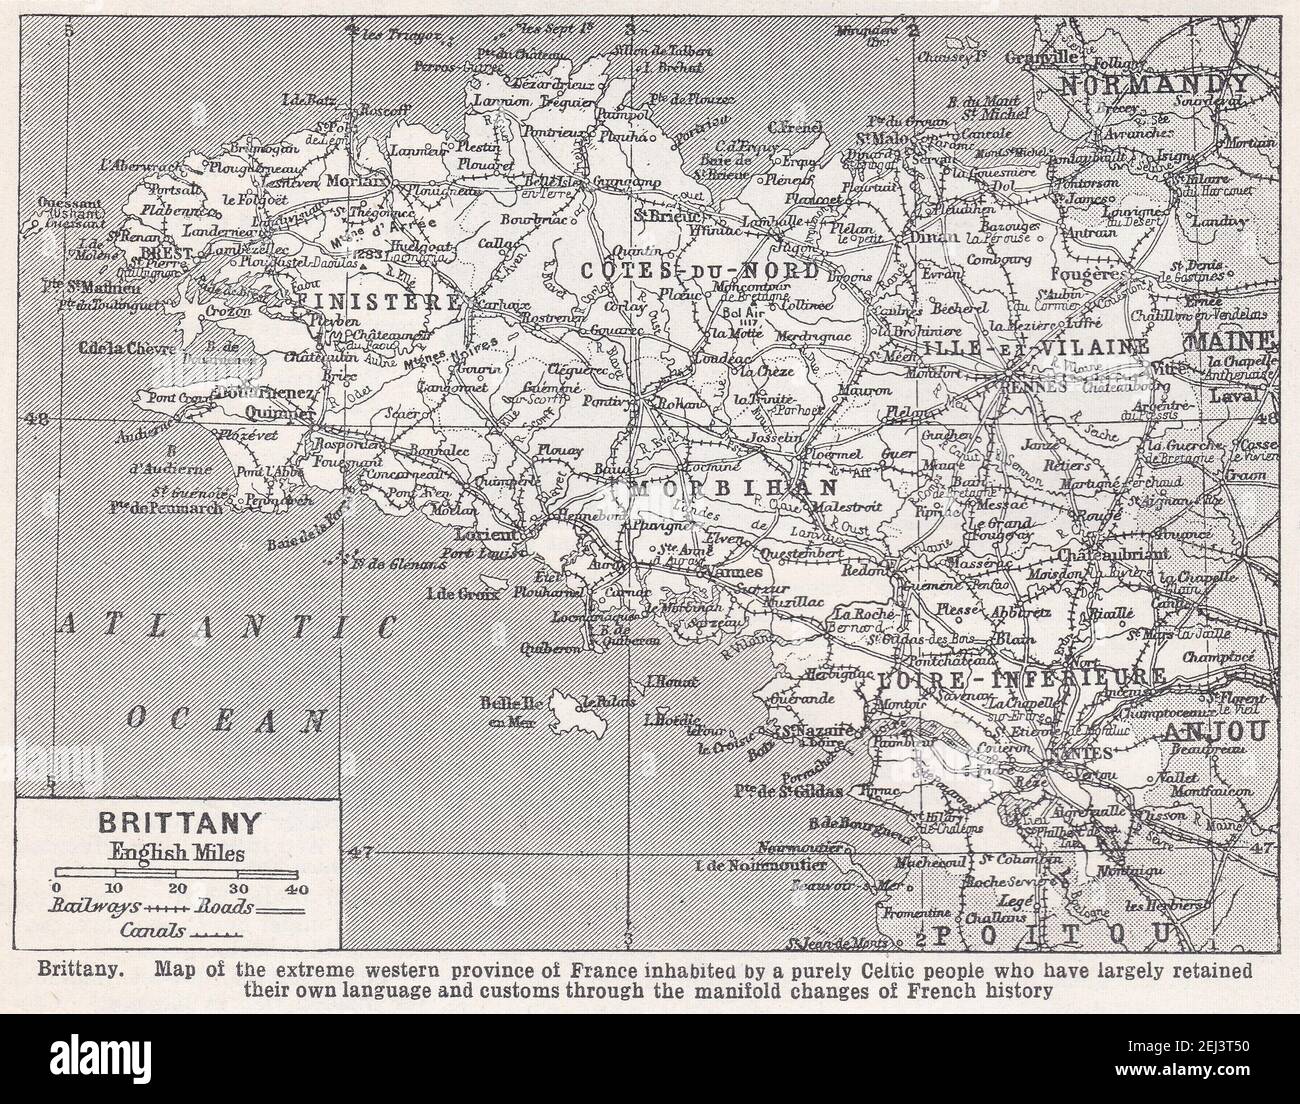 Vintage map of Brittany showing extreme western province of France inhabited by a purely Celtic people 1900s. Stock Photo